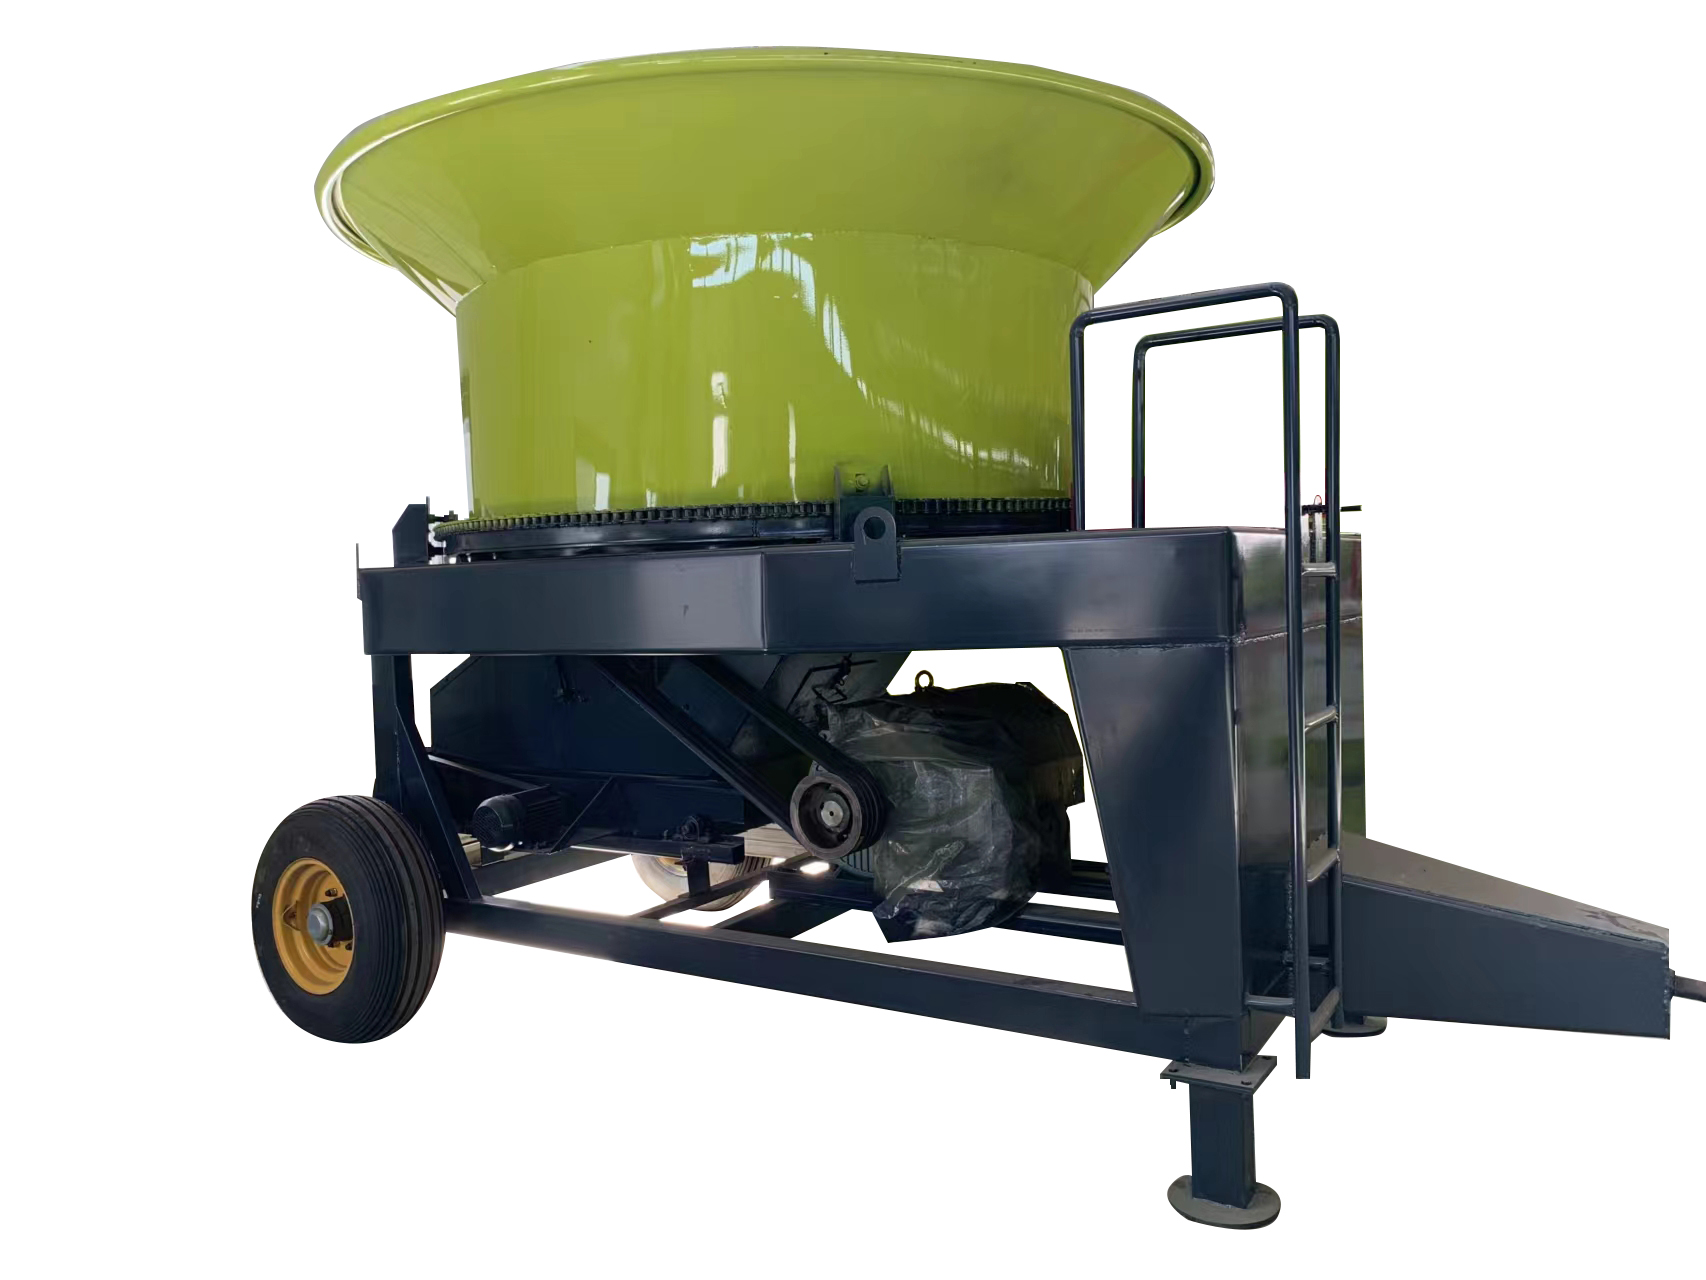 Advantages of forage grinder for cattle and sheep